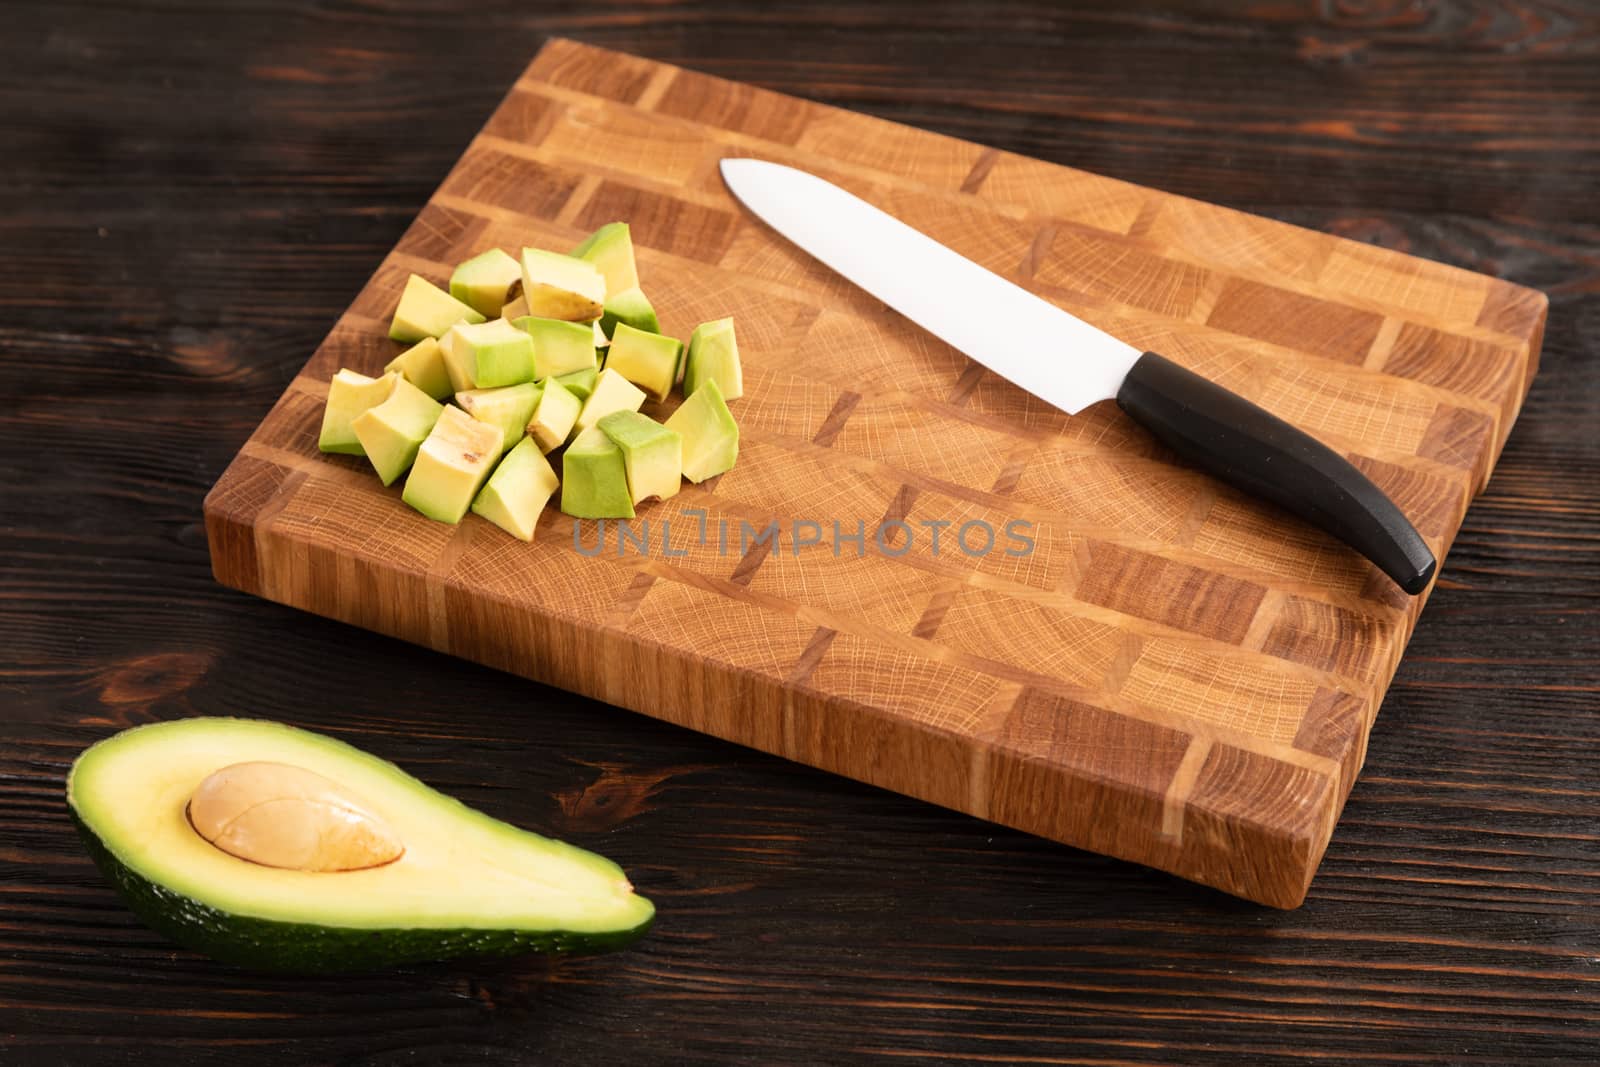 Avocado sliced on wooden cutting board by sveter